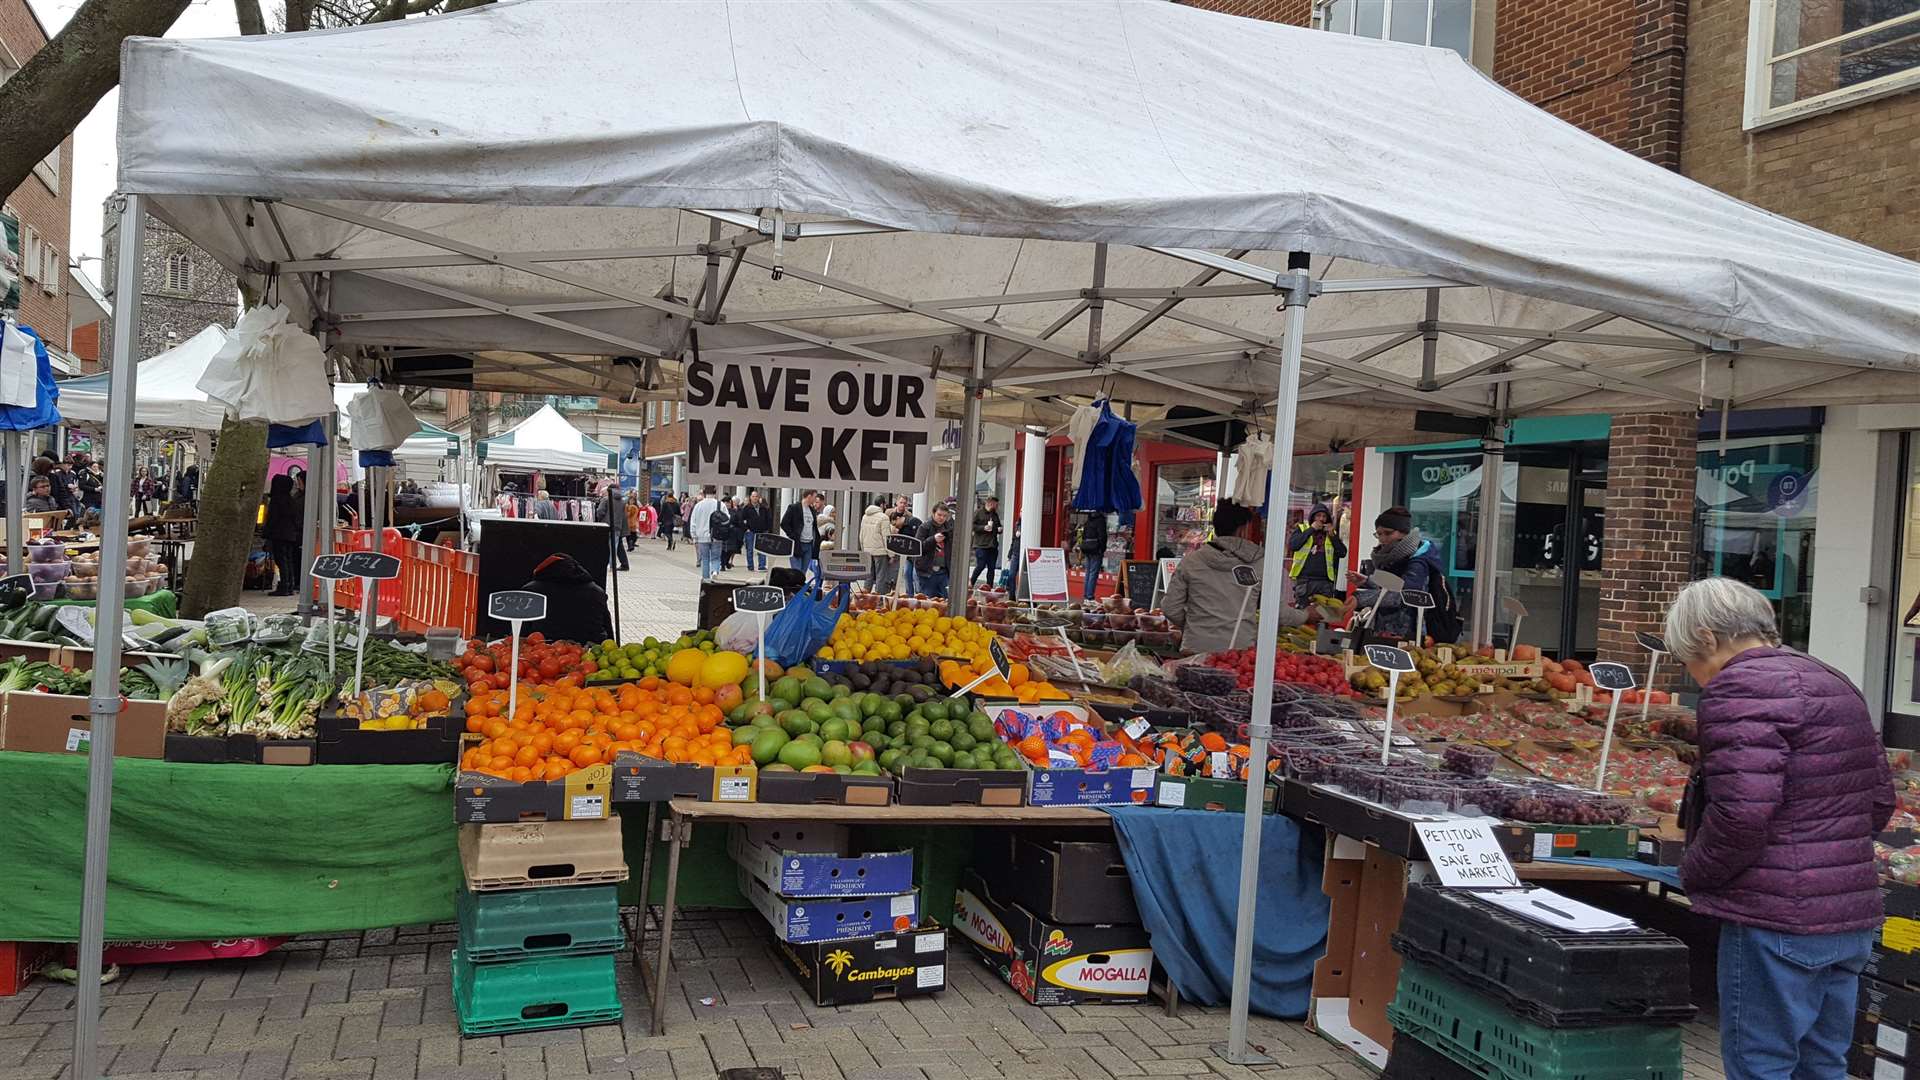 Supporters led a campaign to save Canterbury Market